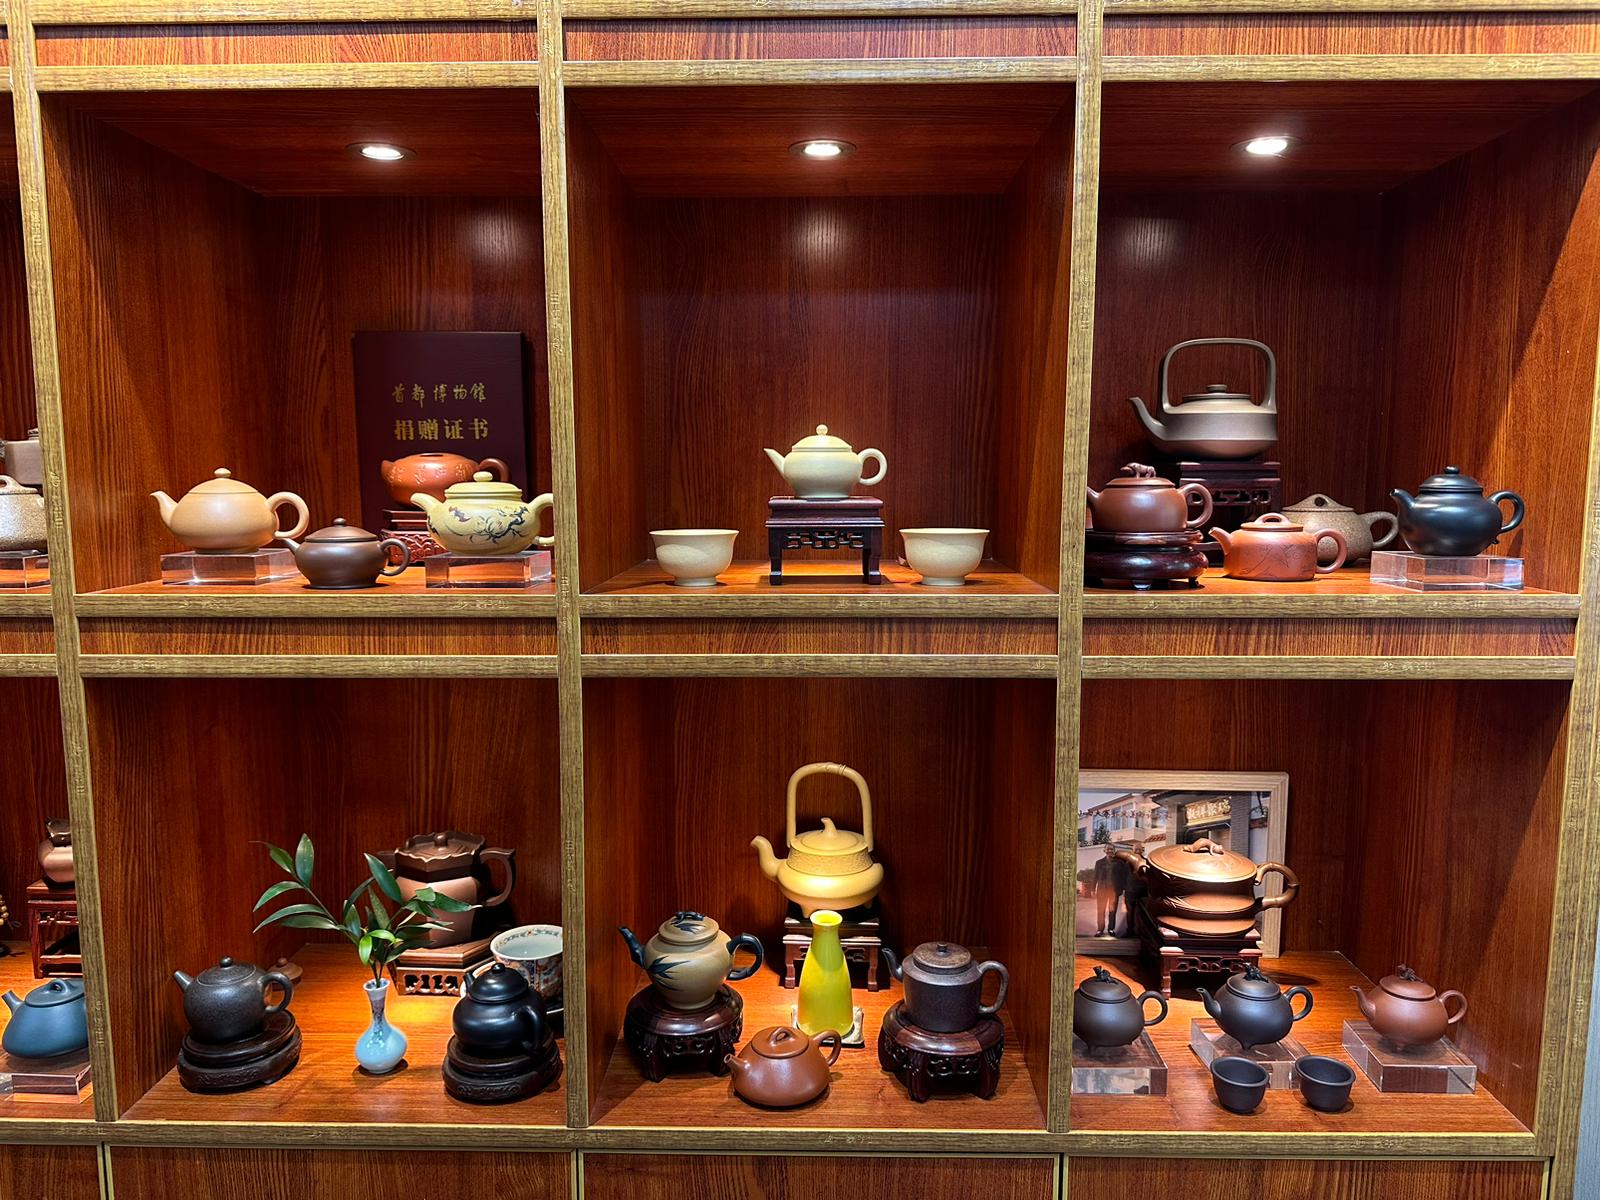 Commissioned ZiSha SET: 薄胎水平 Shui Ping, Thin-Walled, + Two Cups 60ml each, ALL made with Cao Family's 100% BenShan LüNi 本山绿泥, crafted by L4 Assoc Master Artist Zhang Ke 助理工艺美术师, 张轲。- bespoke commissioned for our esteemed patron, Mr L.Tran, in the U.S.